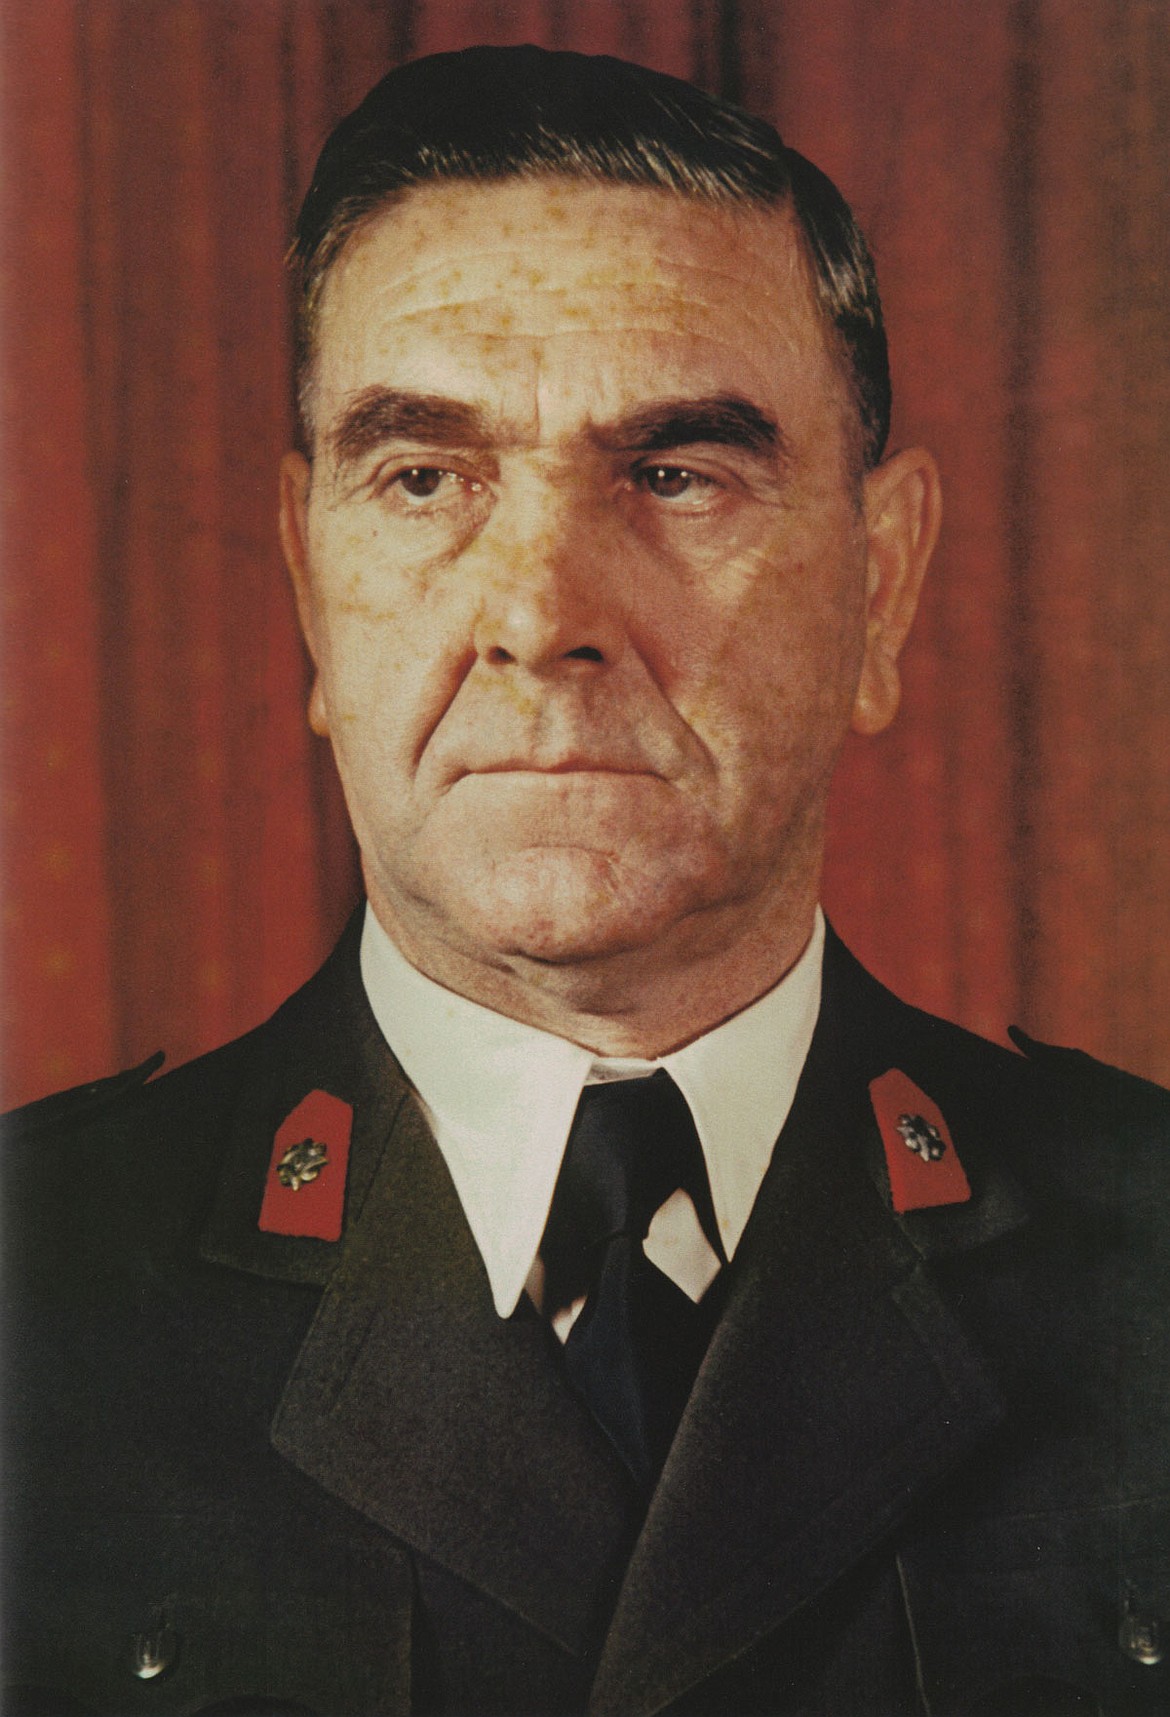 Yugoslavia ultra-nationalist fascist Ustase leader Ante Pavelich collaborated with German occupiers during World War II.